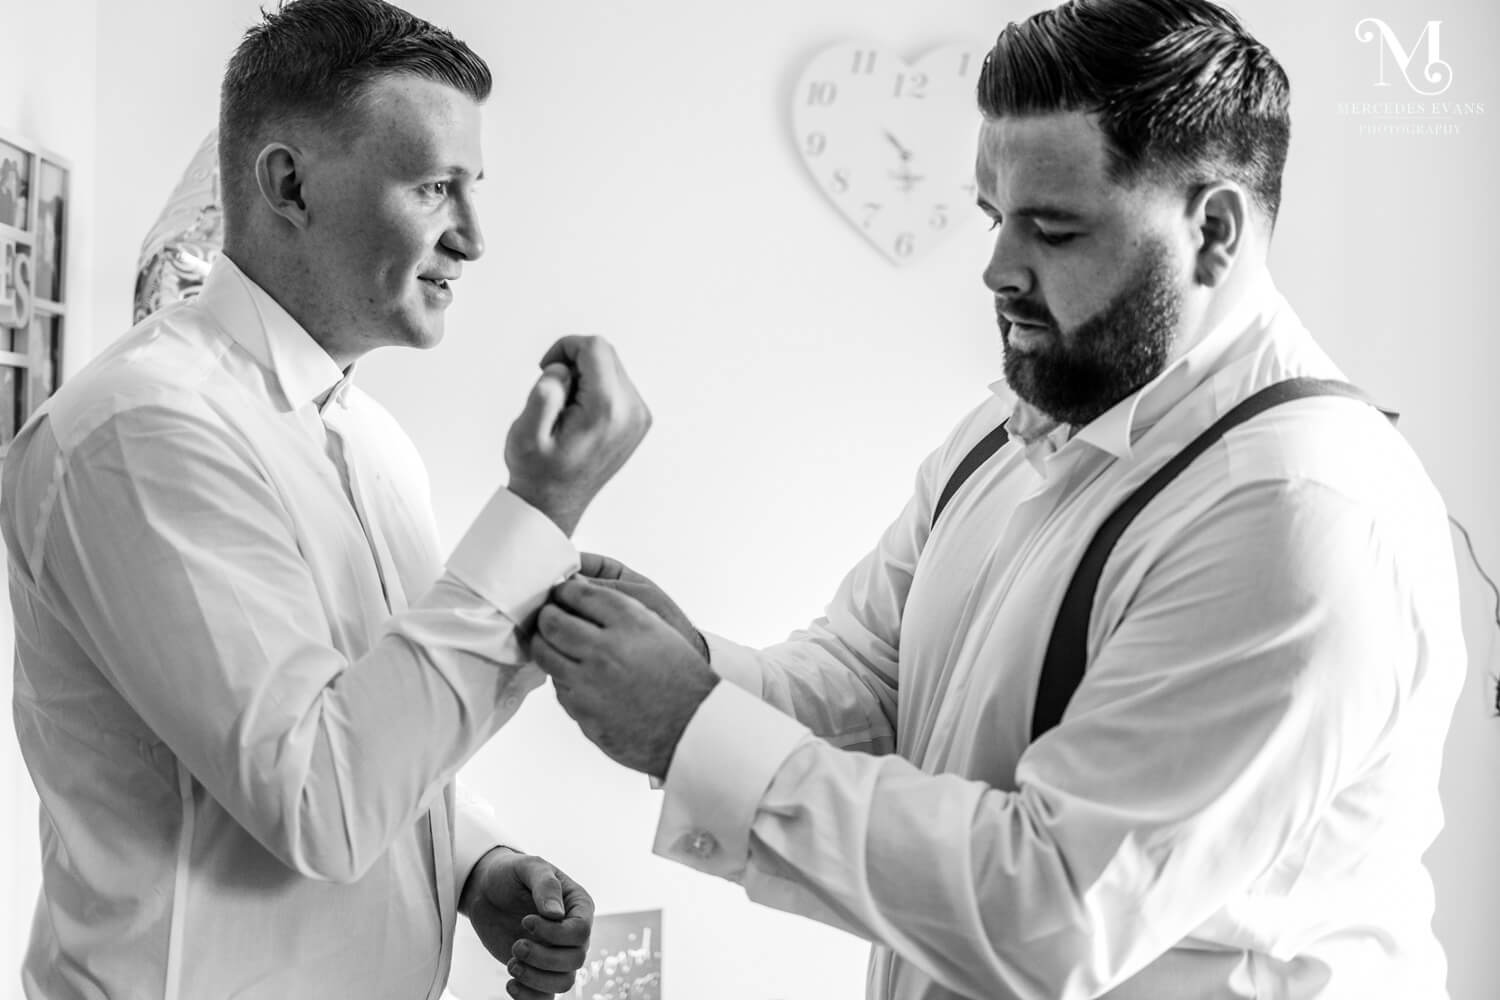 The groomsmen help each other with cufflinks